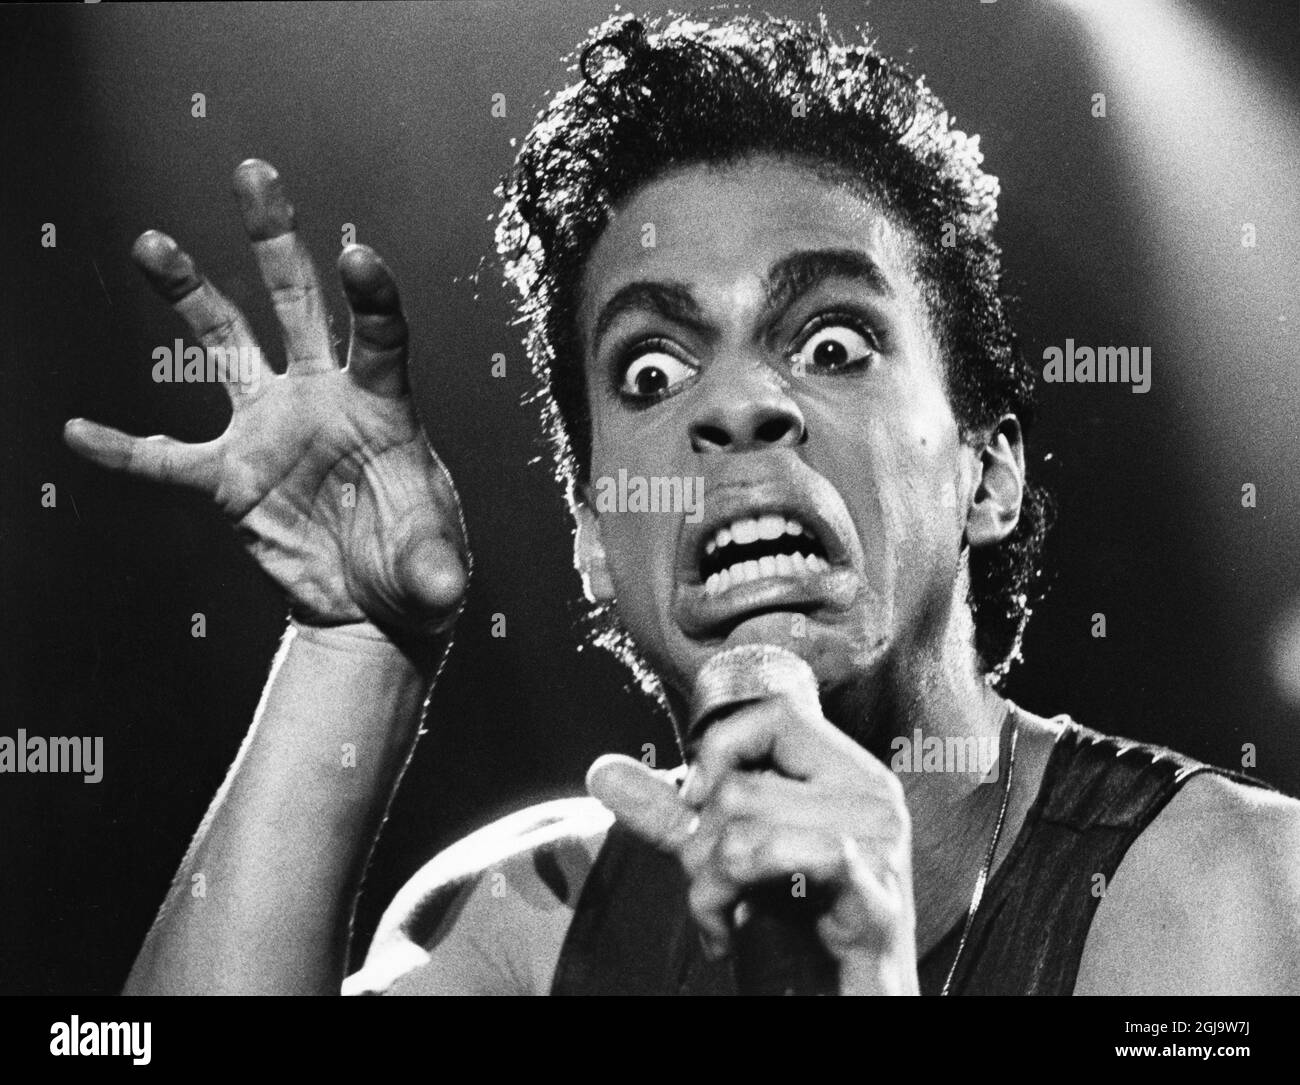 Prince 40 American Singer Poster Music Star Photo Tribute Black White Picture 